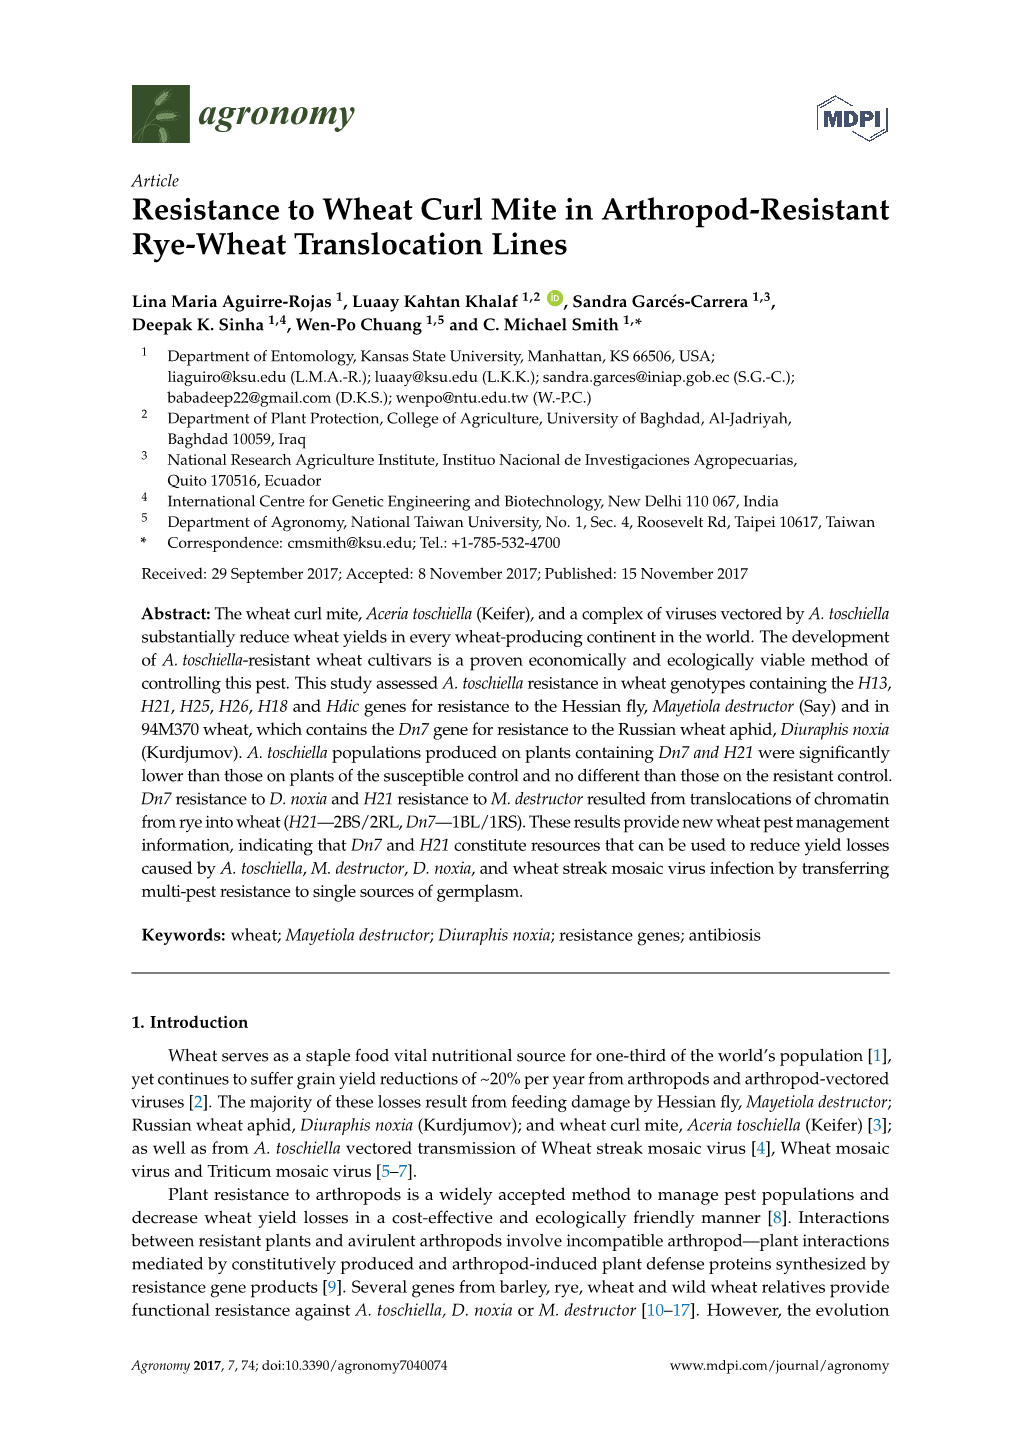 Resistance to Wheat Curl Mite in Arthropod-Resistant Rye-Wheat Translocation Lines